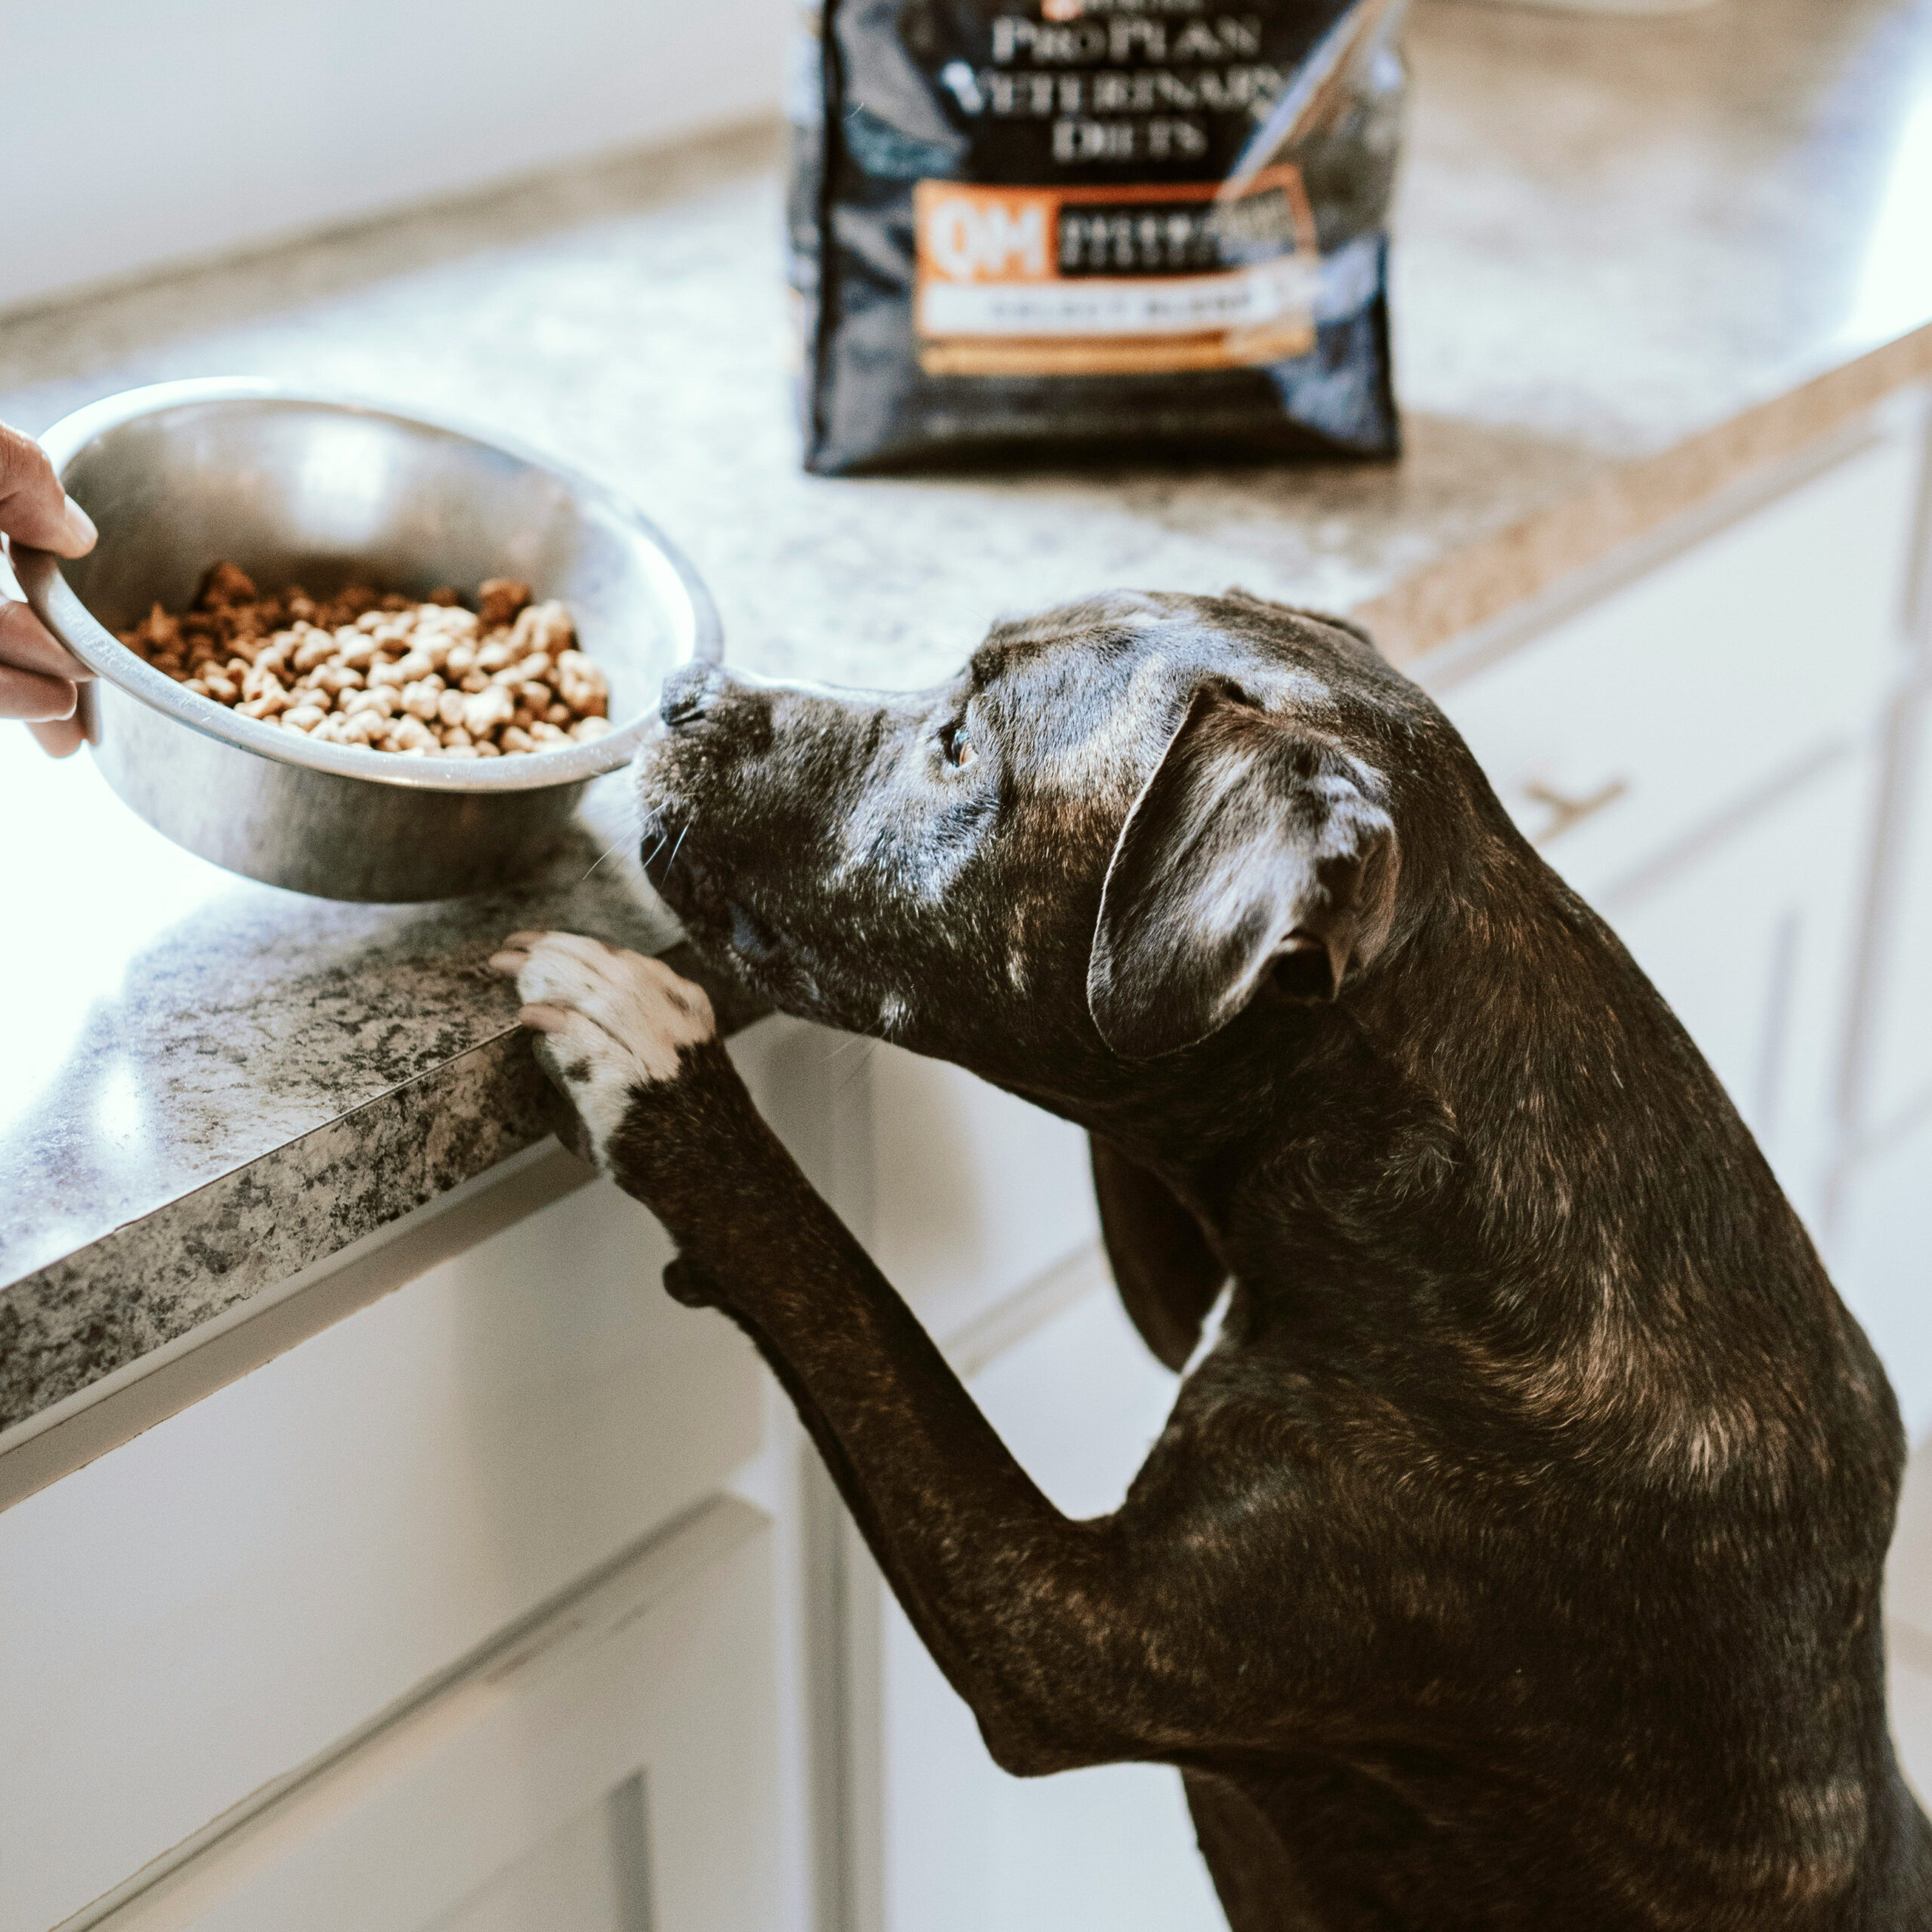 "Mastering Transformation: 5 Proven Ways to Positively Stop Counter Surfing and Enhance Your Dog's Behavior!"